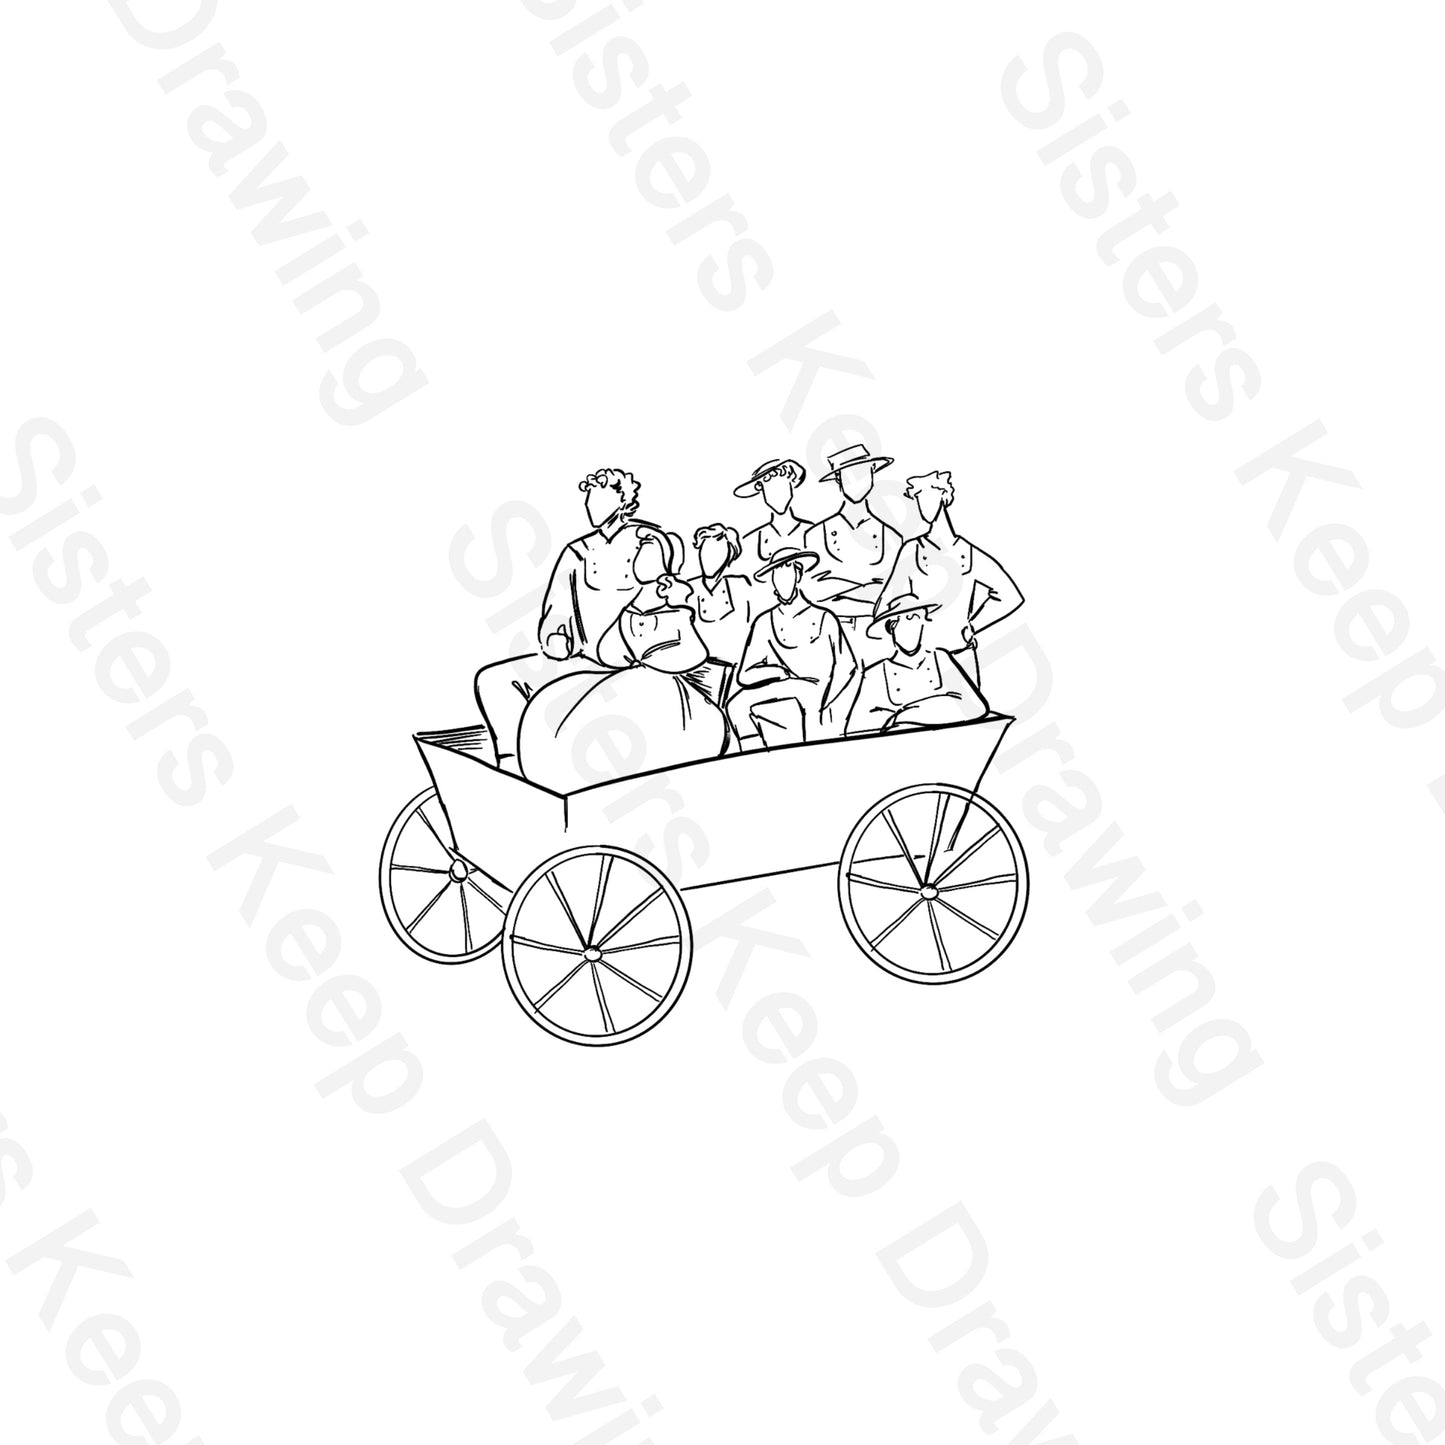 Seven Brothers in Wagon - Seven Brides for Seven Brothers Inspired Tattoo Transparent Permission PNG- instant download digital printable artwork